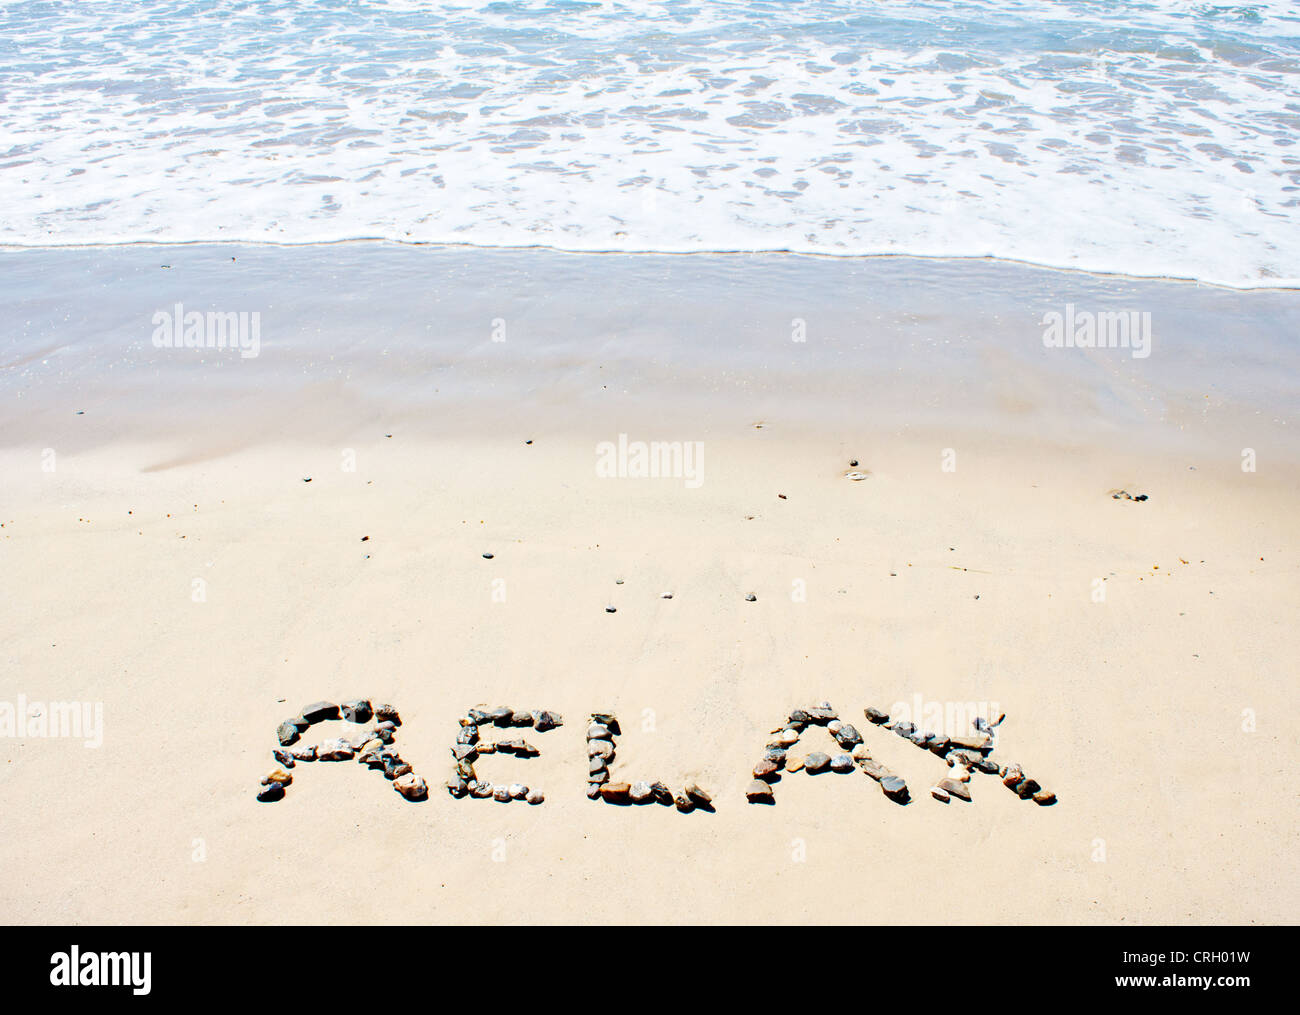 Relax written in sand at beach Stock Photo